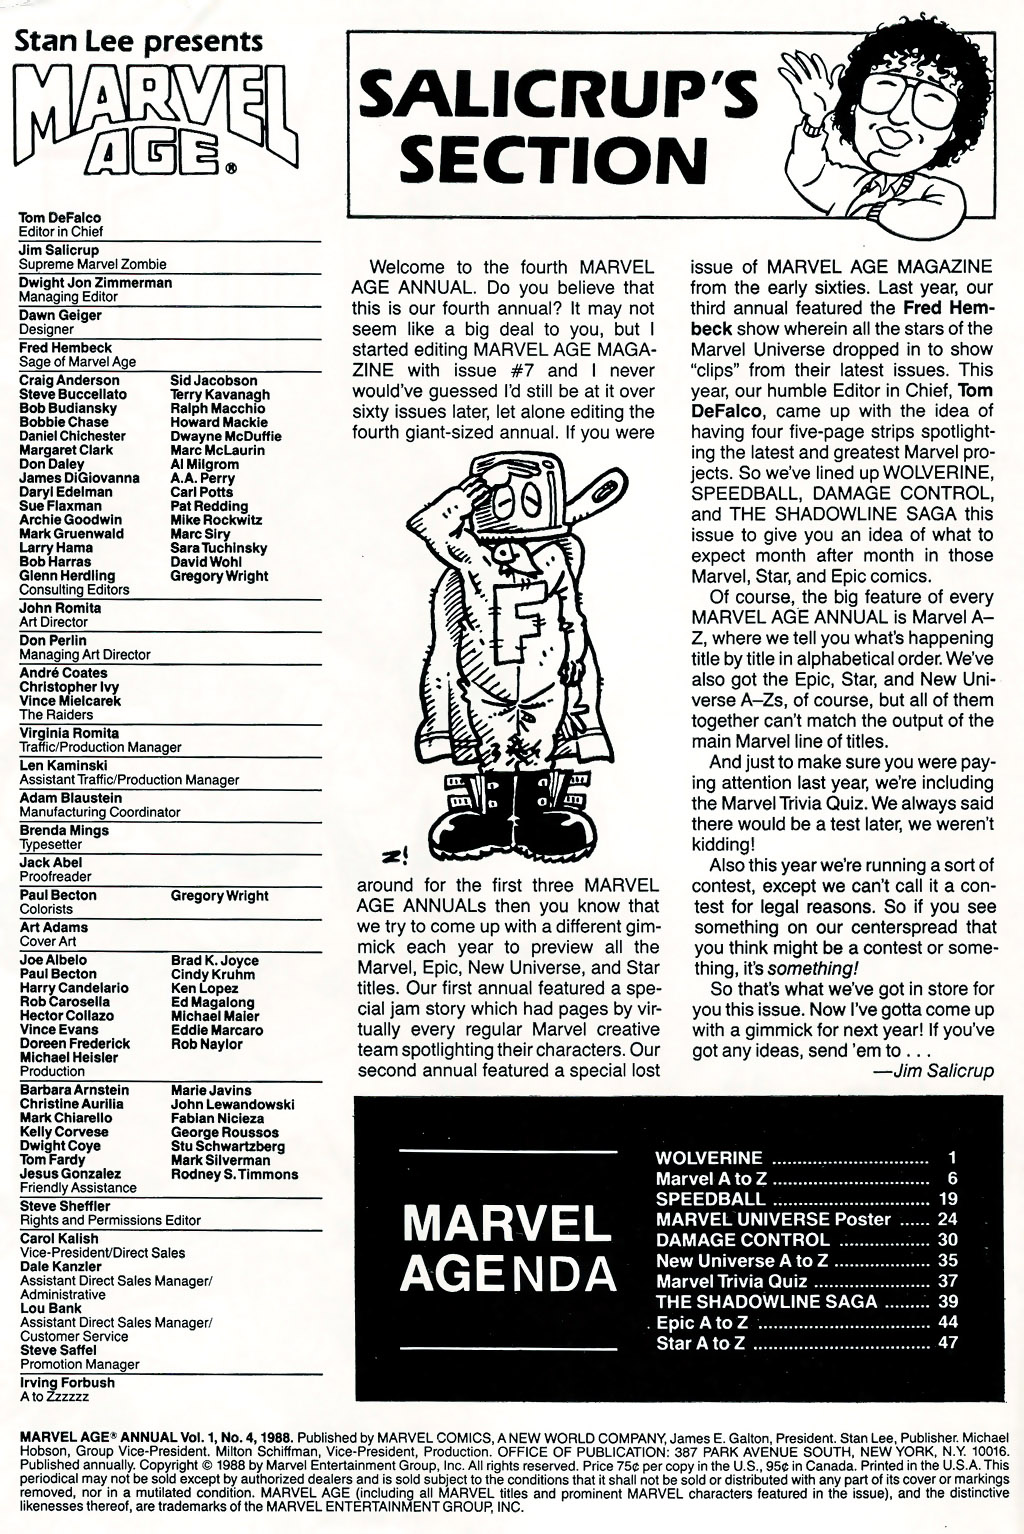 Read online Marvel Age Annual comic -  Issue #4 - 2